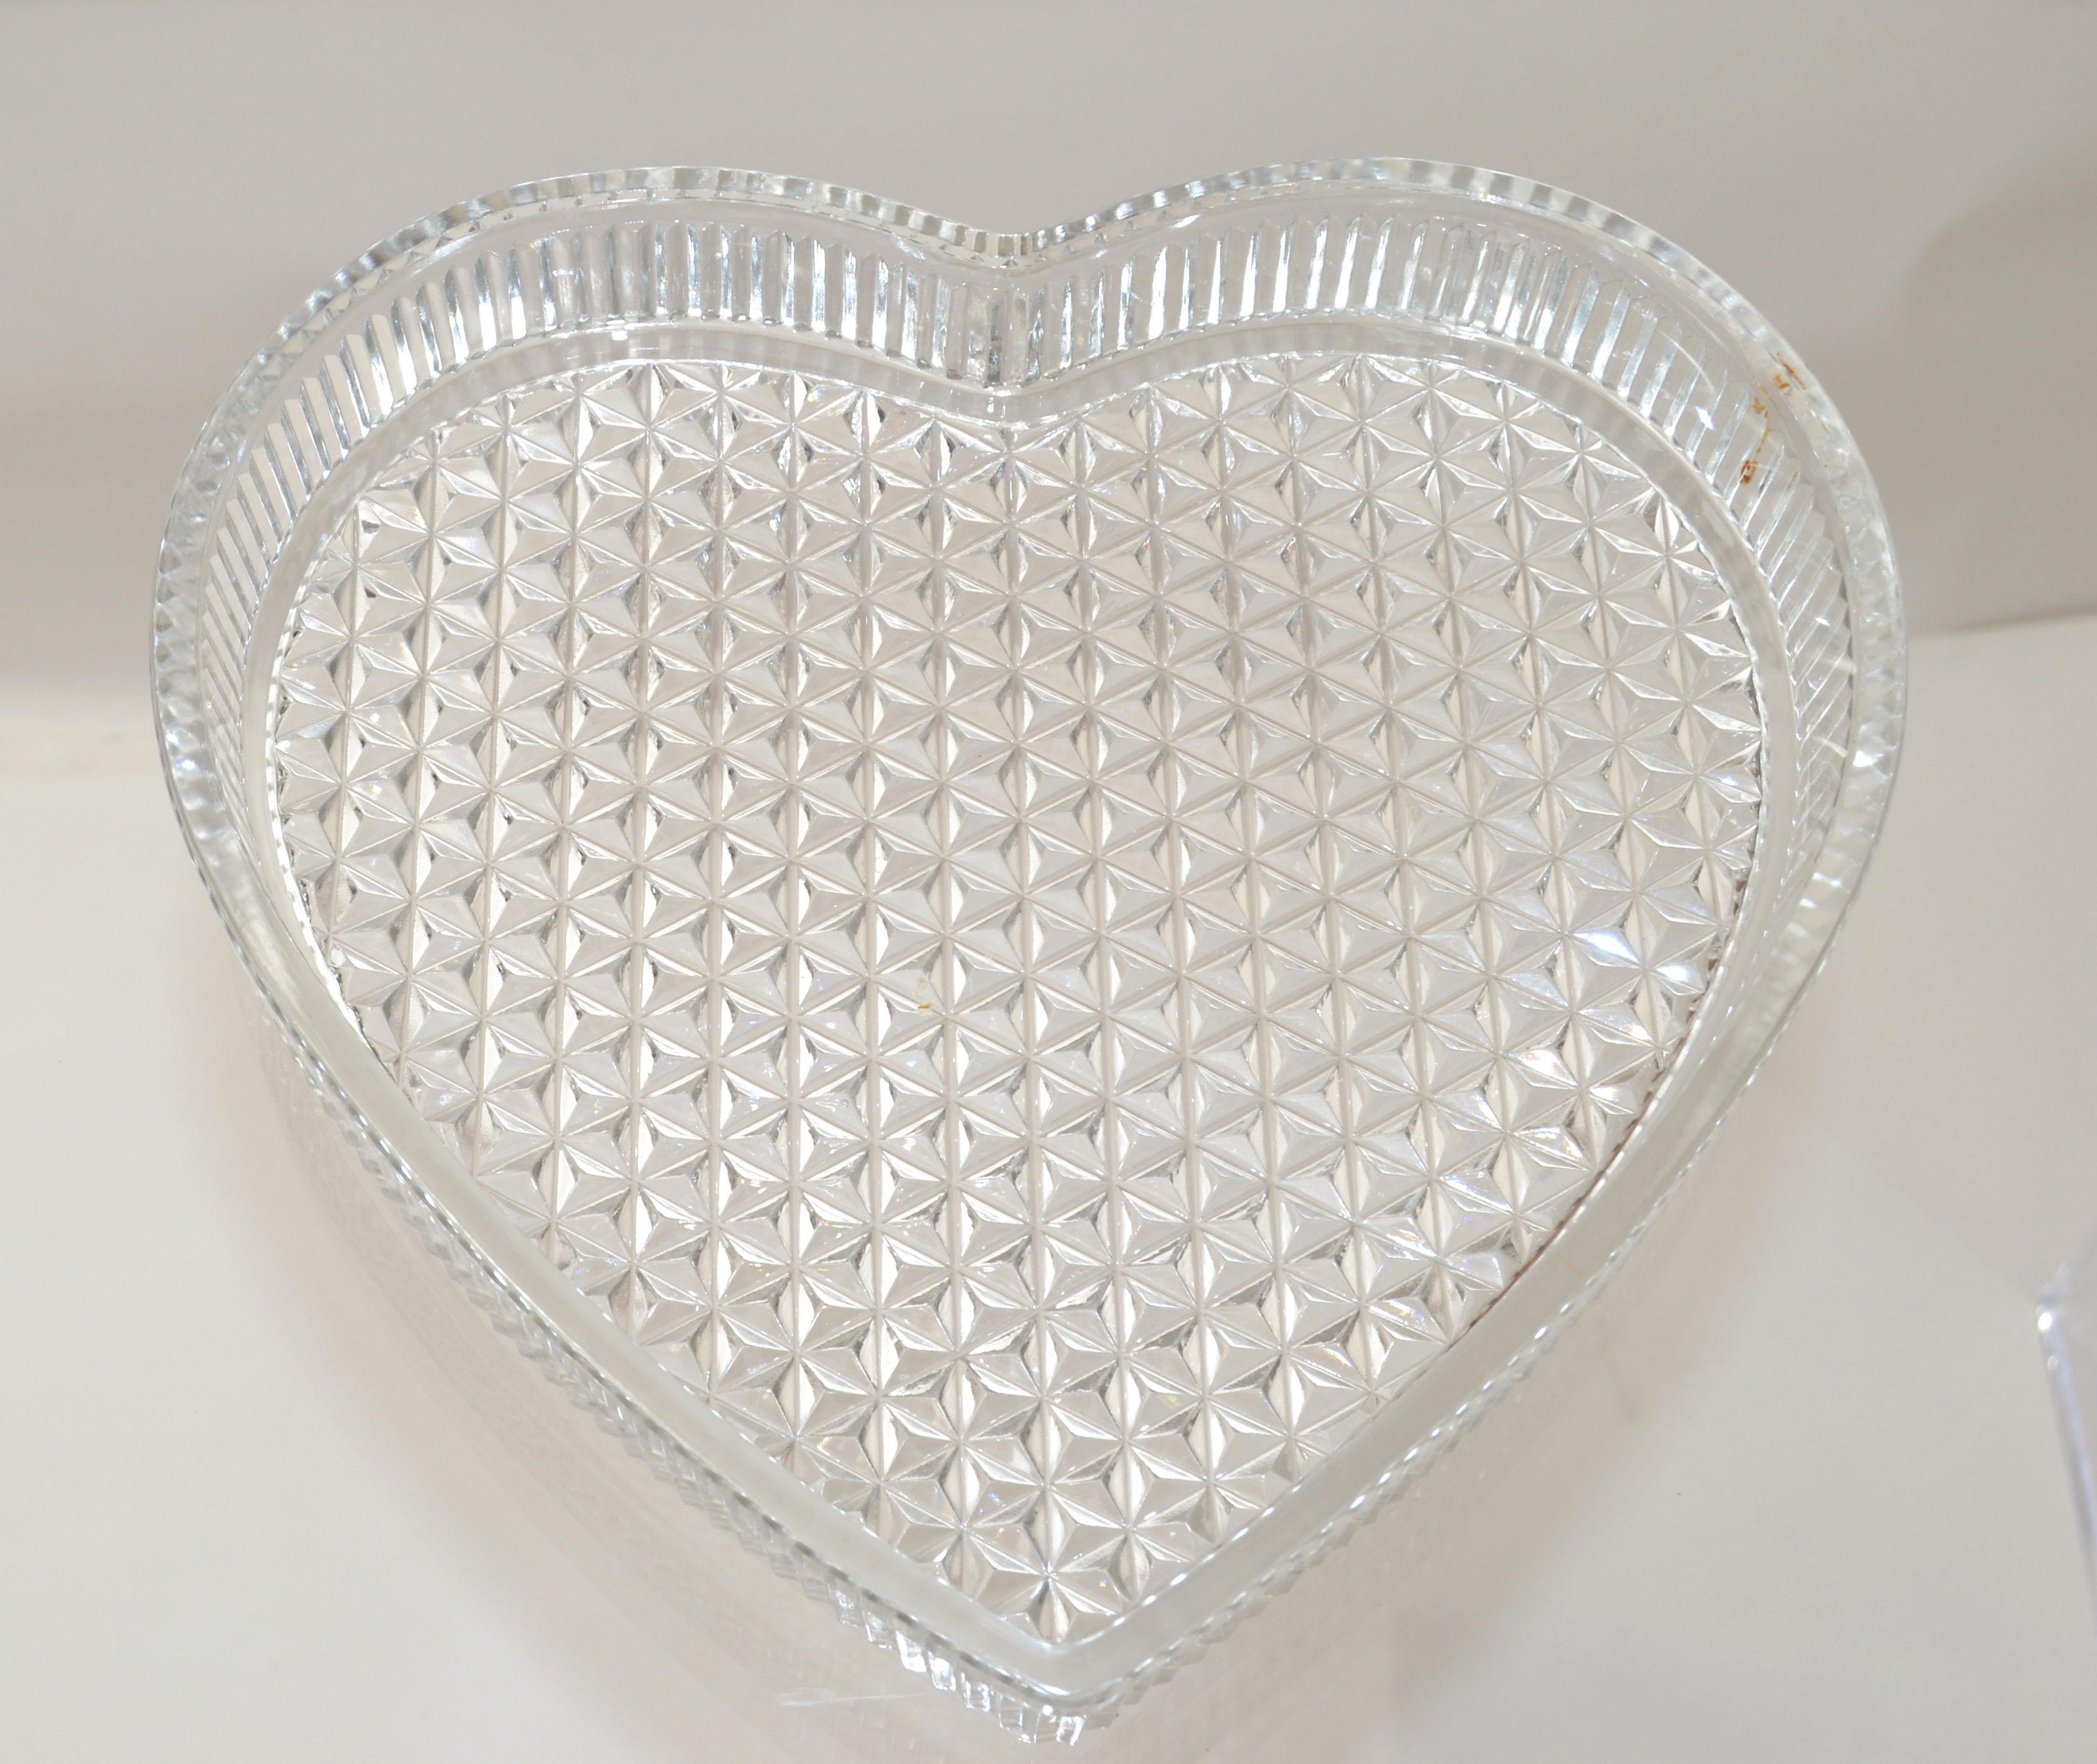 Heart Shape Lidded Dish in Crystal Glass & Steel with Bakelite & Alabaster Knob In Good Condition For Sale In Miami, FL